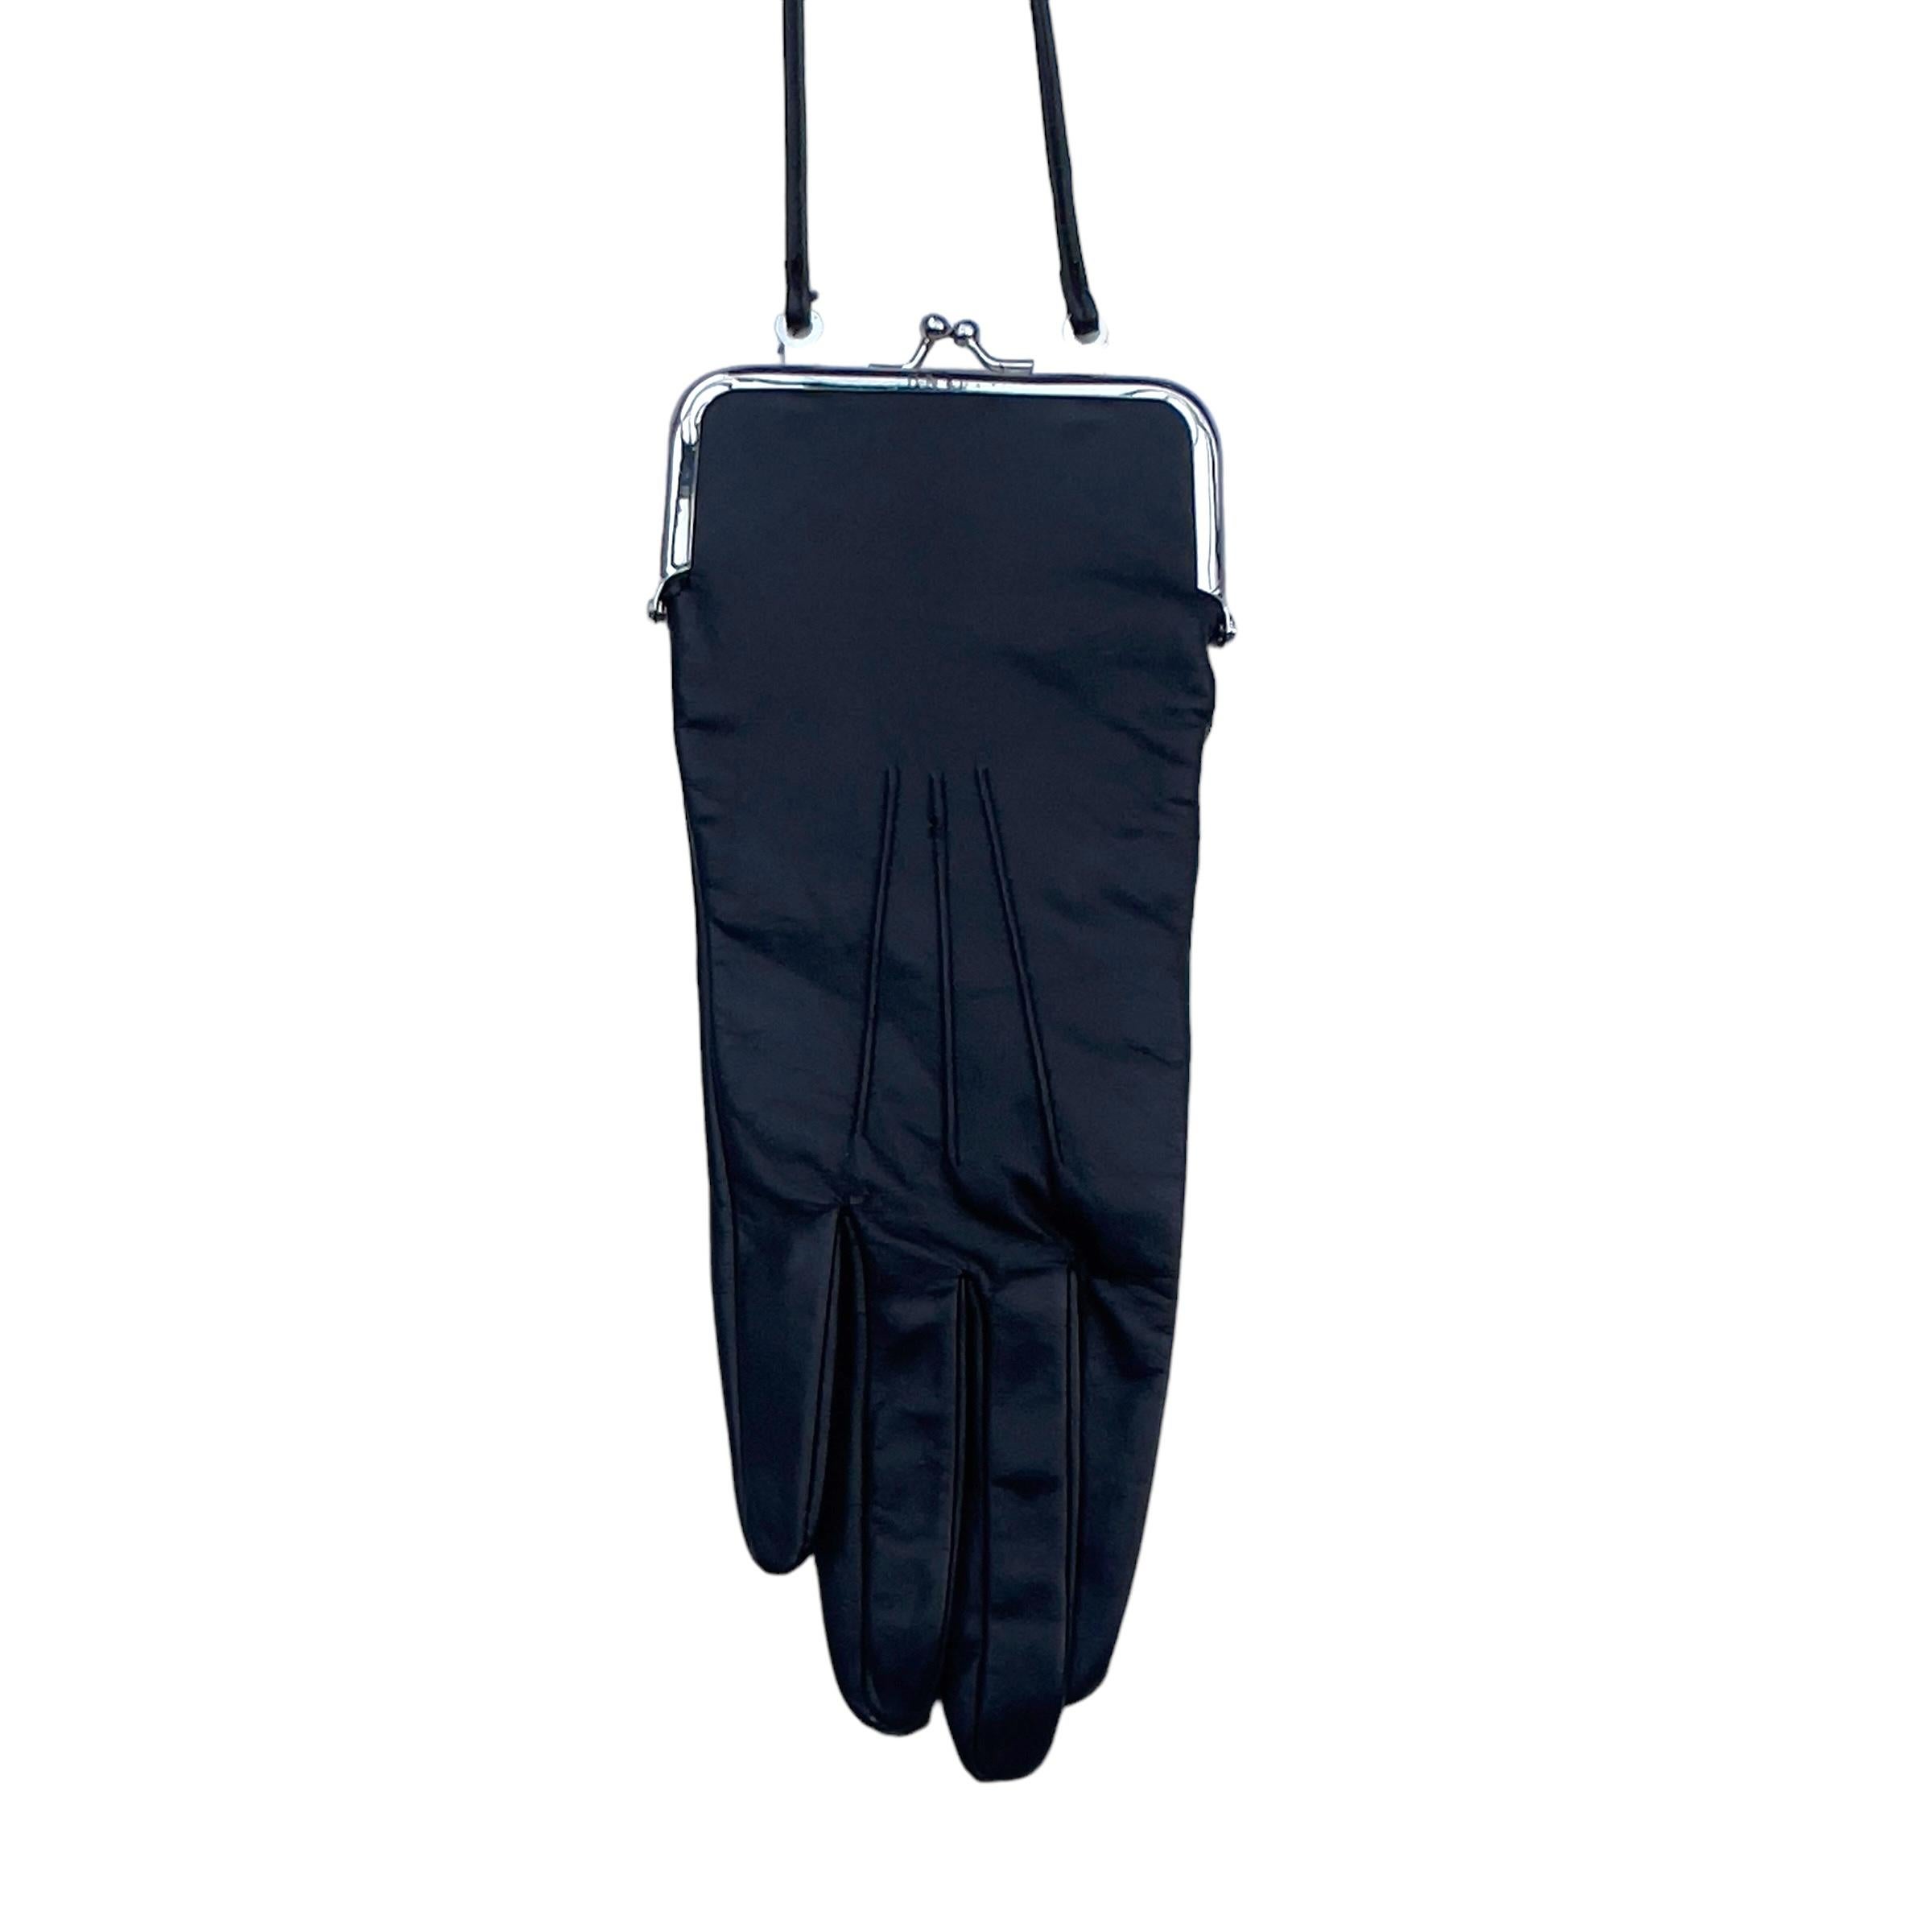 Maison Martin Margiela for H&M glove coin purse/bag in sleek black genuine leather. This piece is a limited edition from the 2012 collaboration between Maison Martin Margiela and H&M, although it was originally crafted in 1999 and re-edited for this